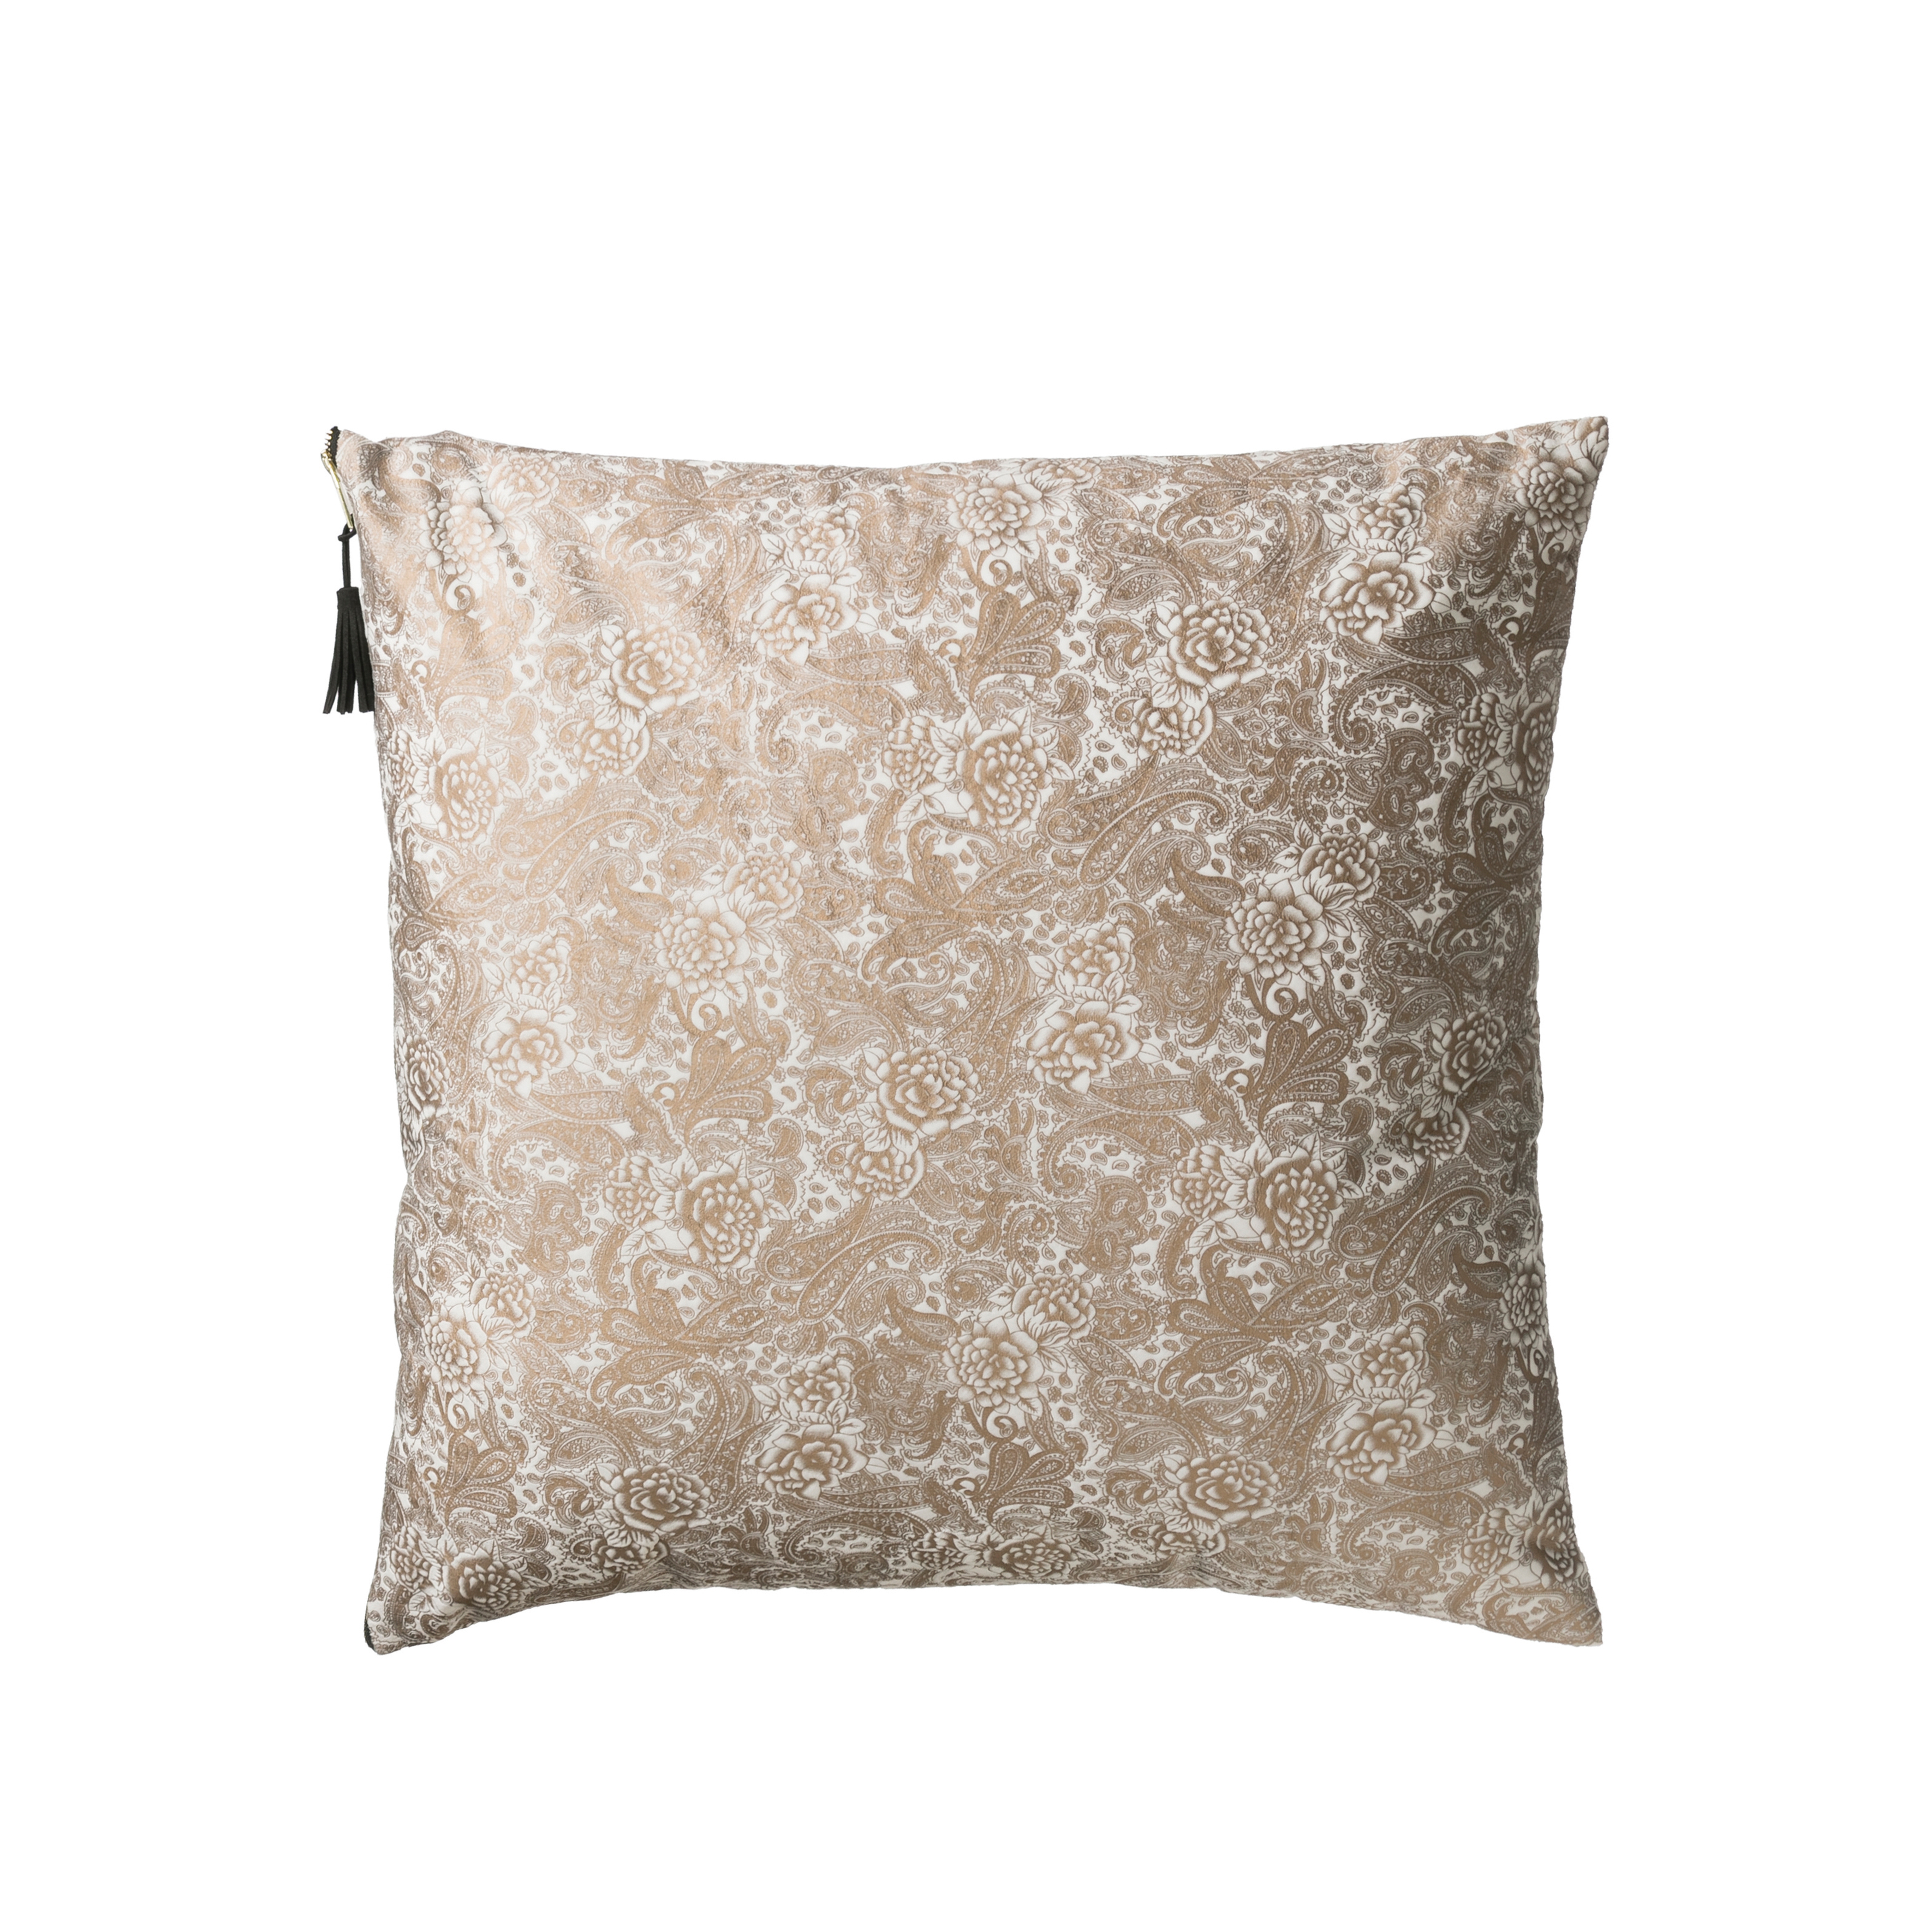 24" Square Polyester Pillow with Floral Tole Pattern & Tassel Accent - Moss & Wilder